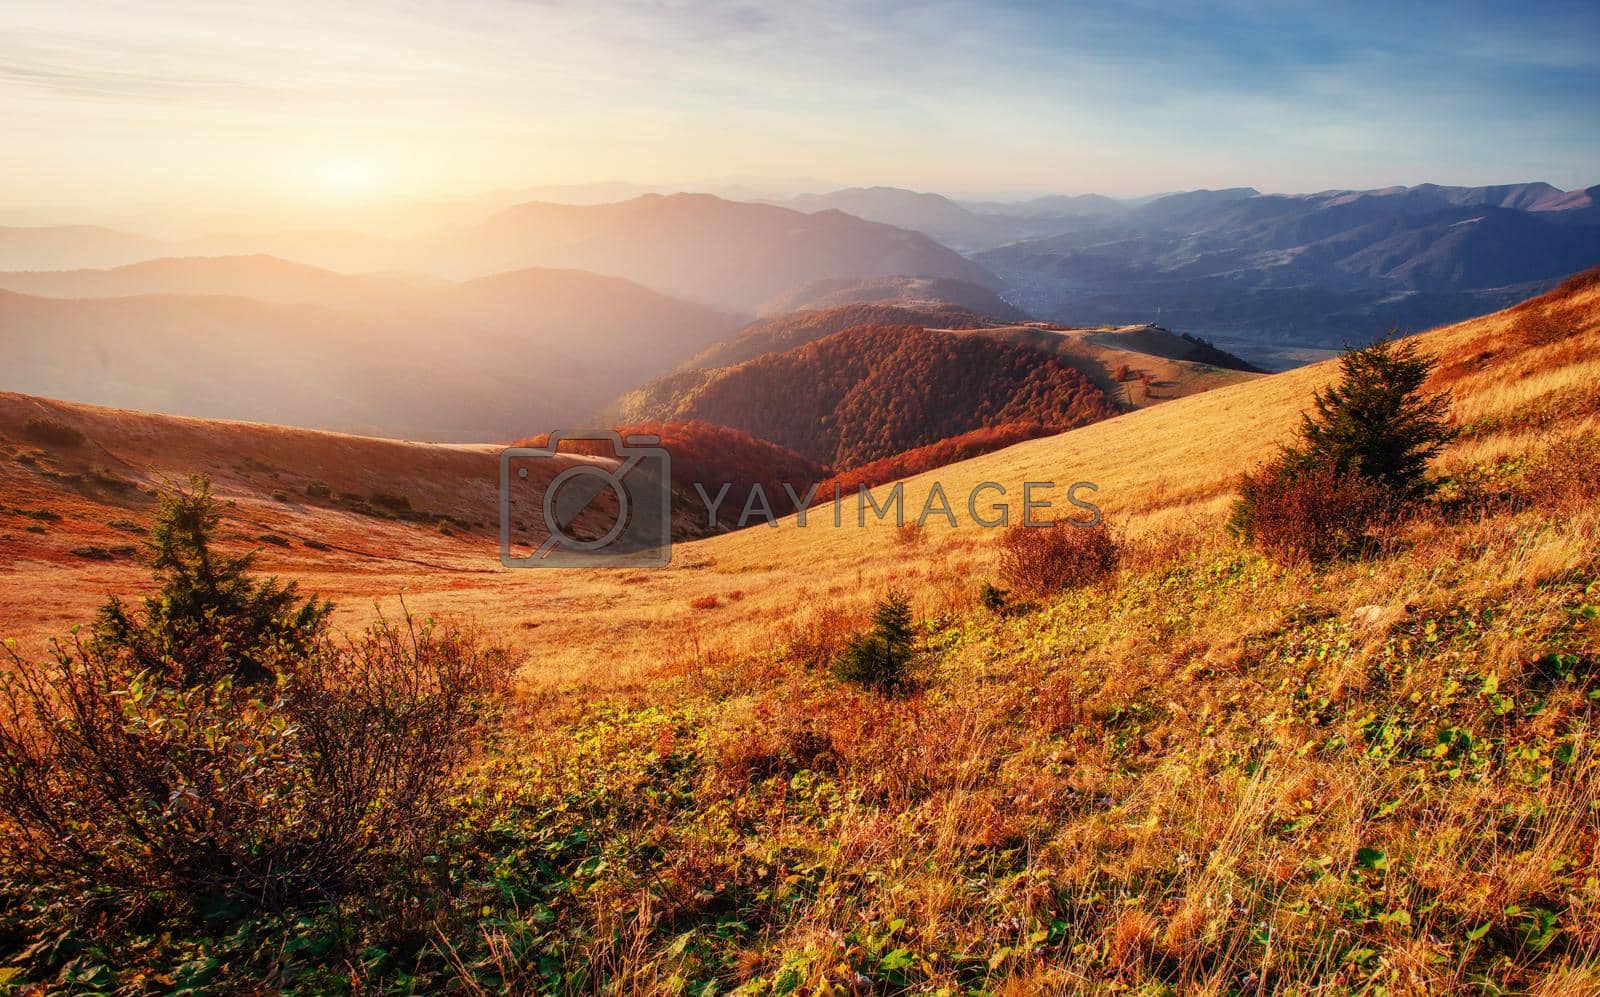 Royalty free image of mountain range in the Carpathian Mountains in the autumn season. by Standret